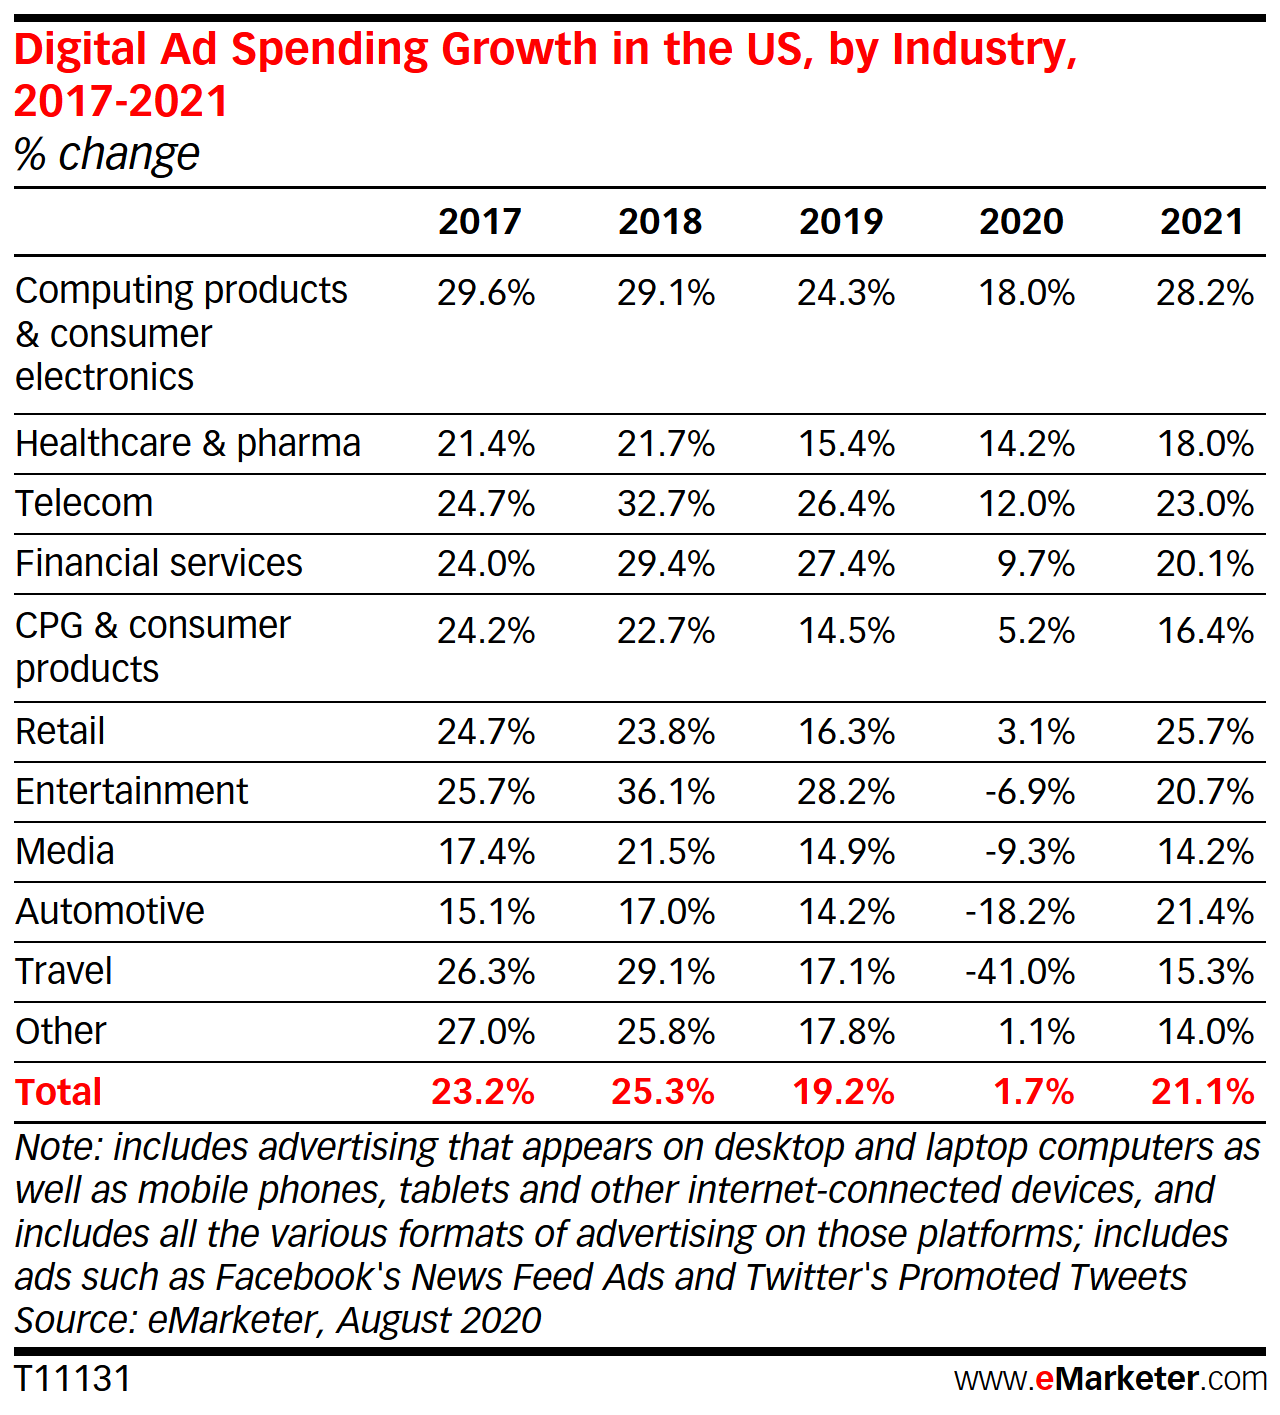 Digital Ad Spending Growth in the US, by Industry, 2017-2021 (% change)